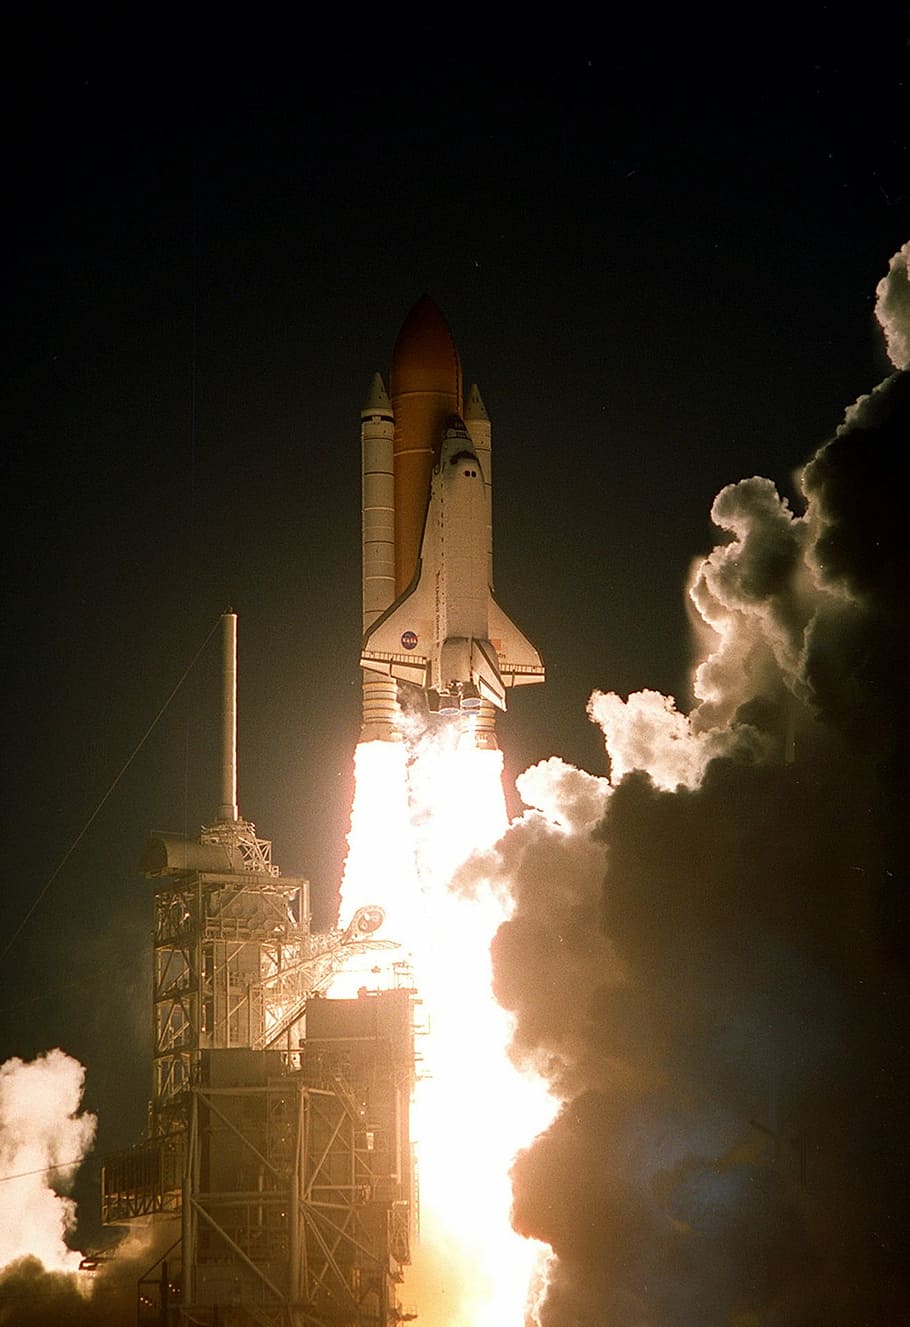 space shuttle night launch photography